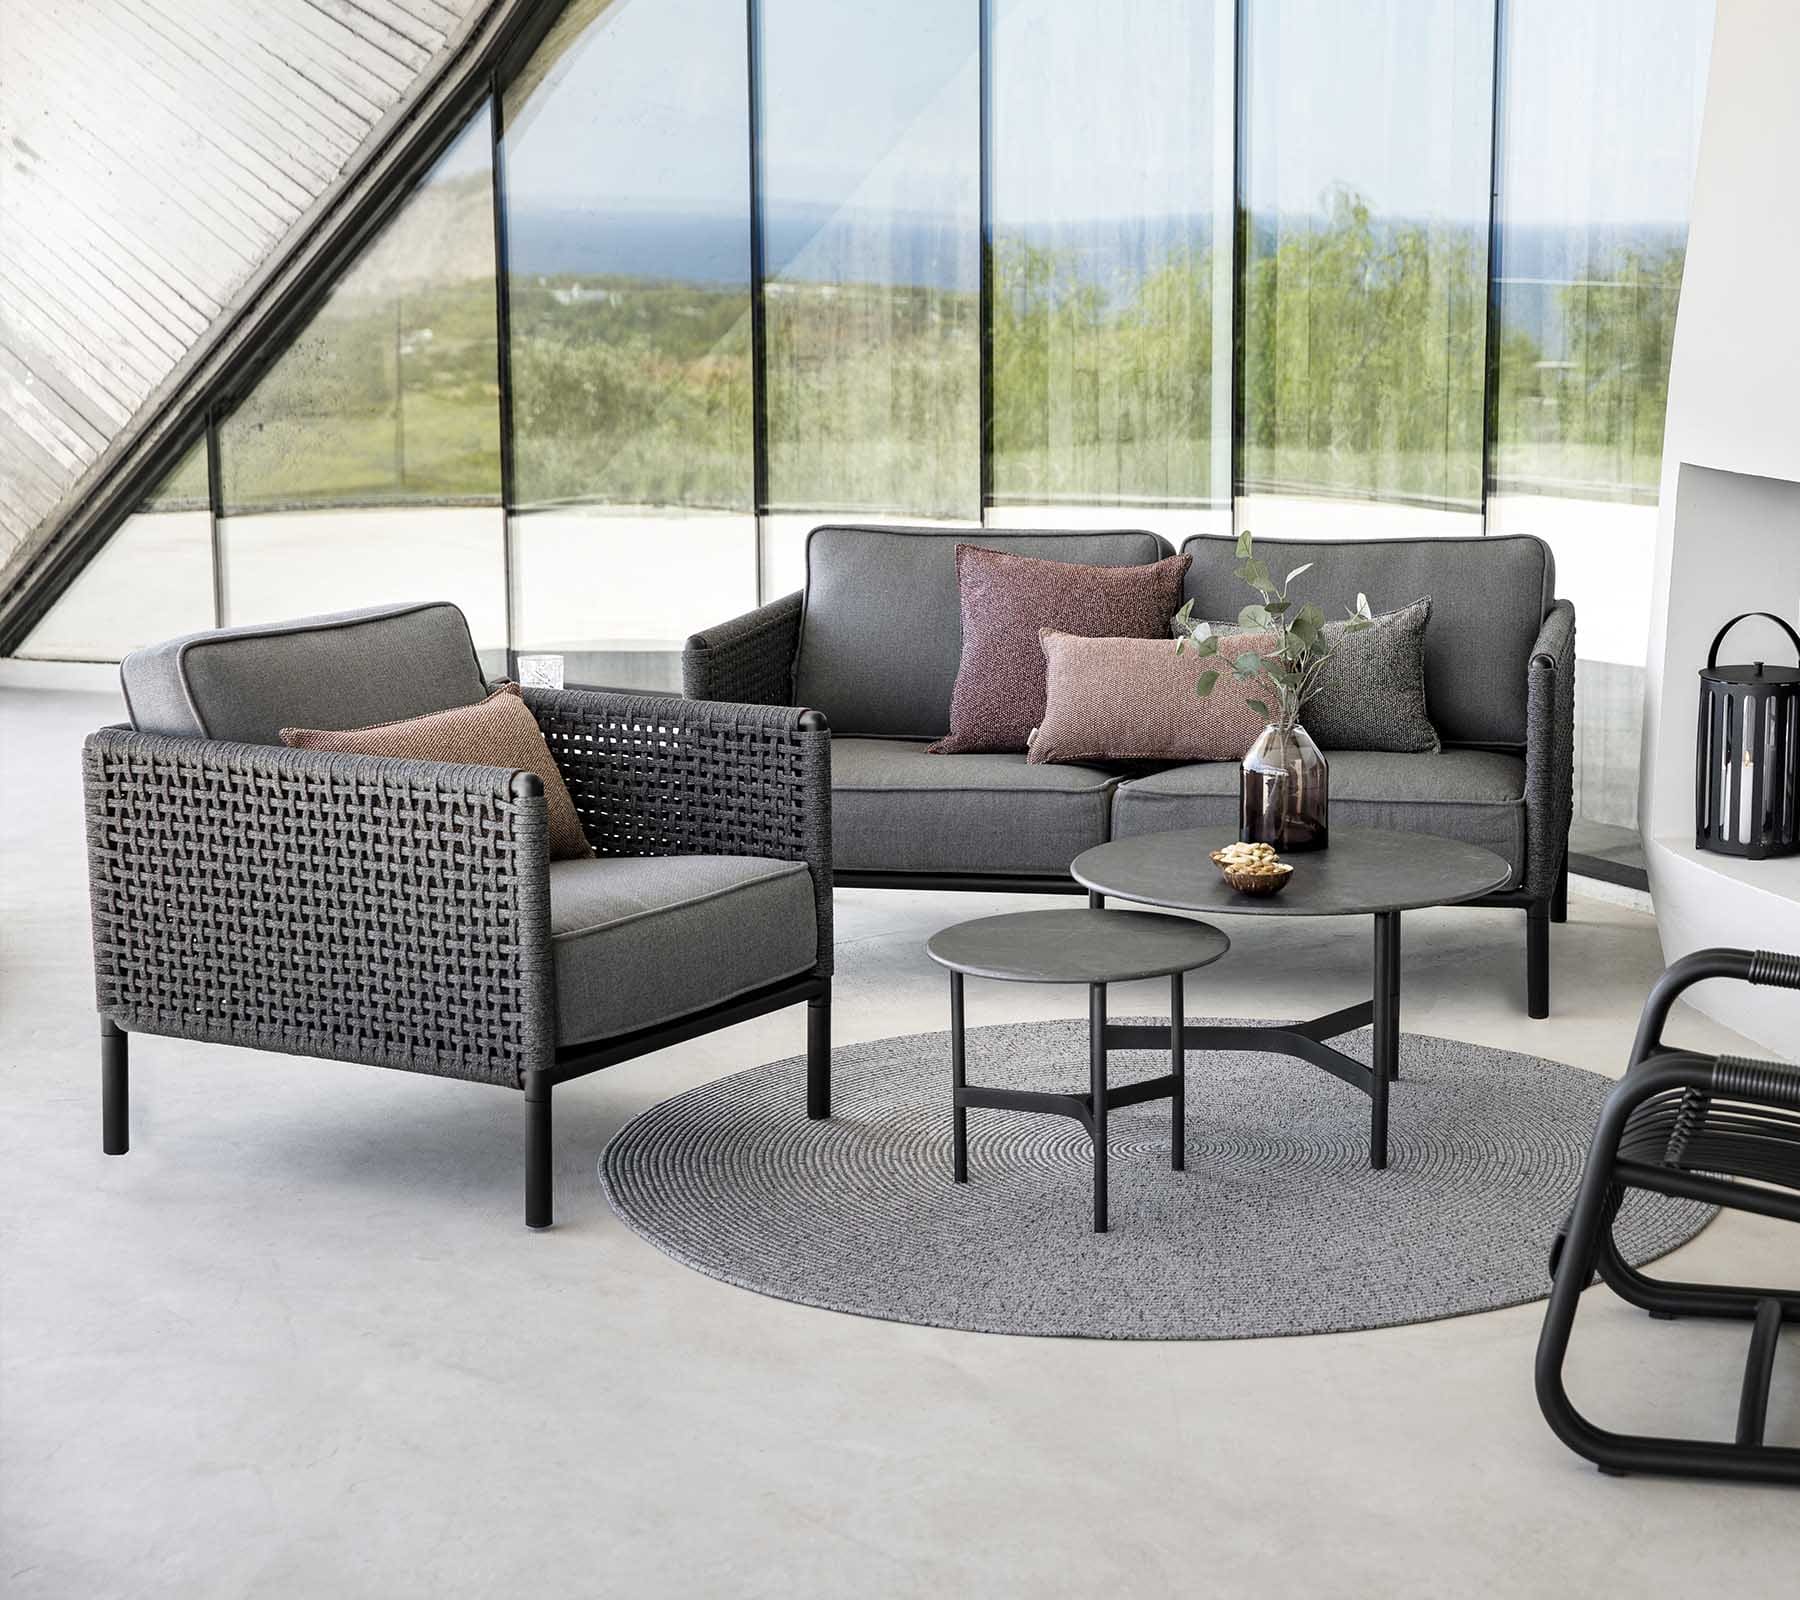 Boxhill's Encore 2-Seater Outdoor Grey Sofa Lava Grey Frame lifestyle image with Encore Outdoor Single Seater Grey Sofa and 2 round table at the center